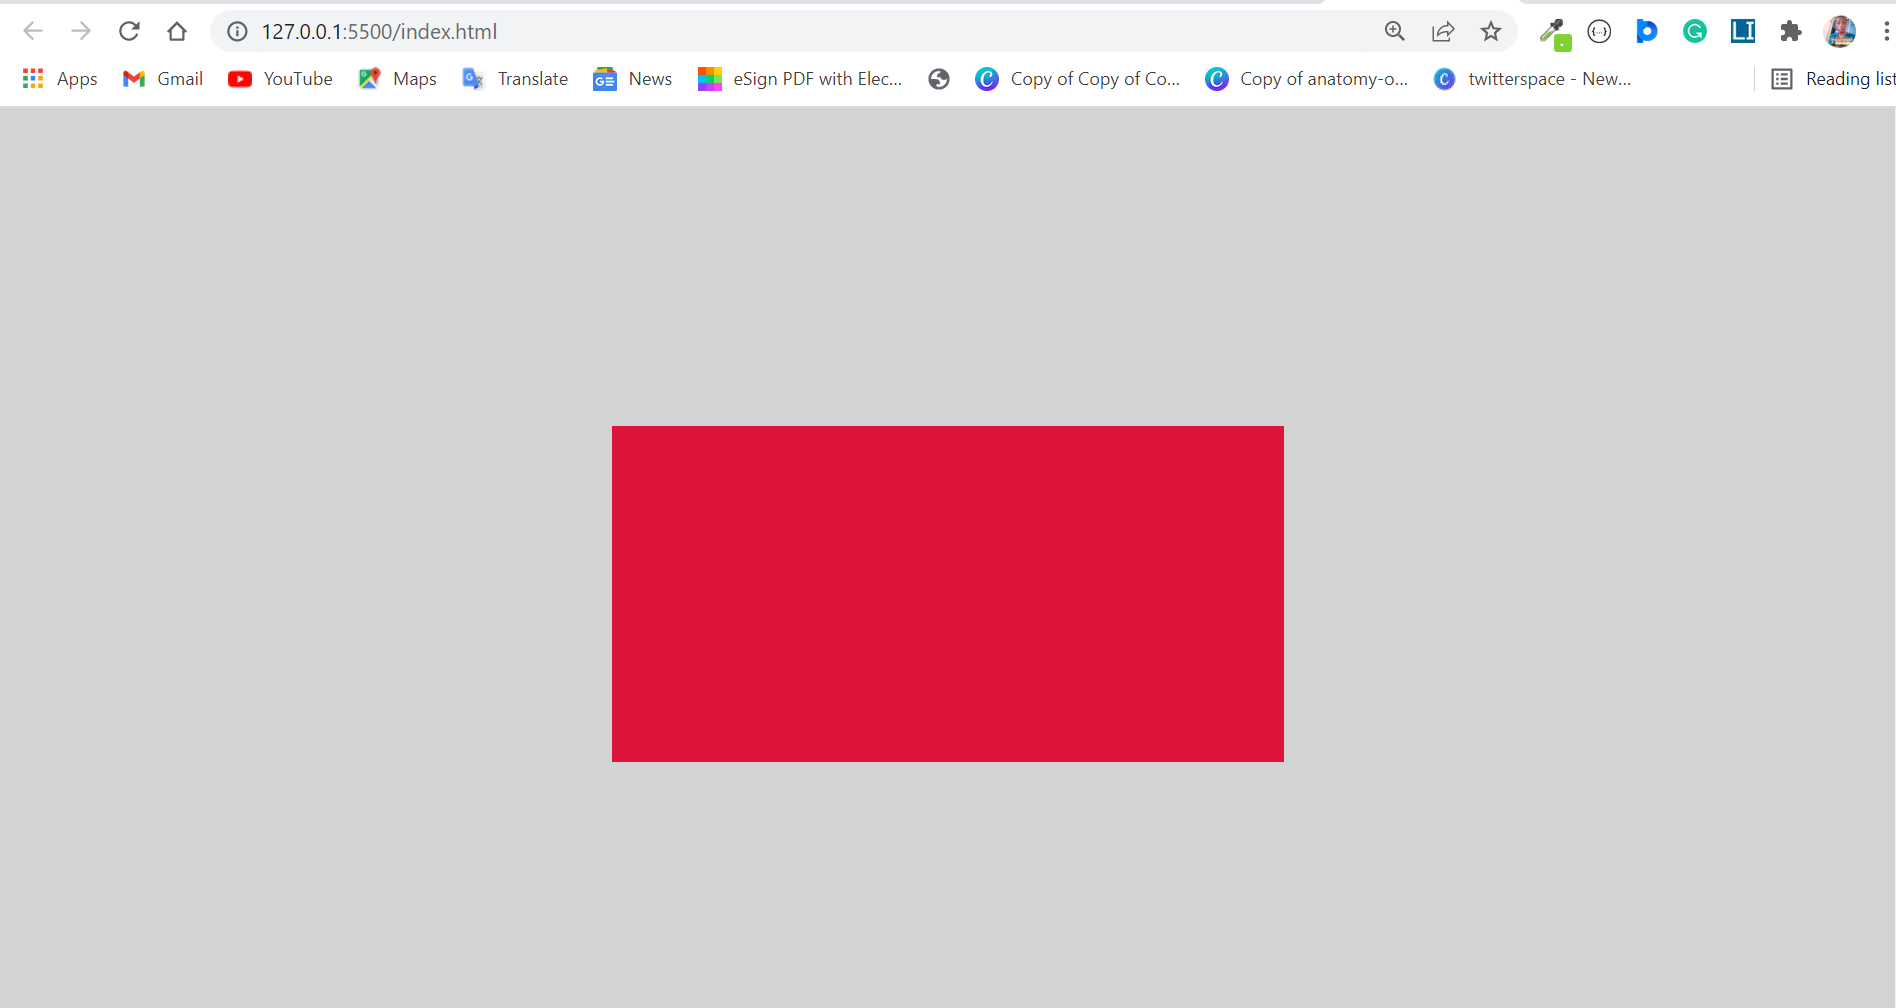 How To Change Background Color In Css On Hover